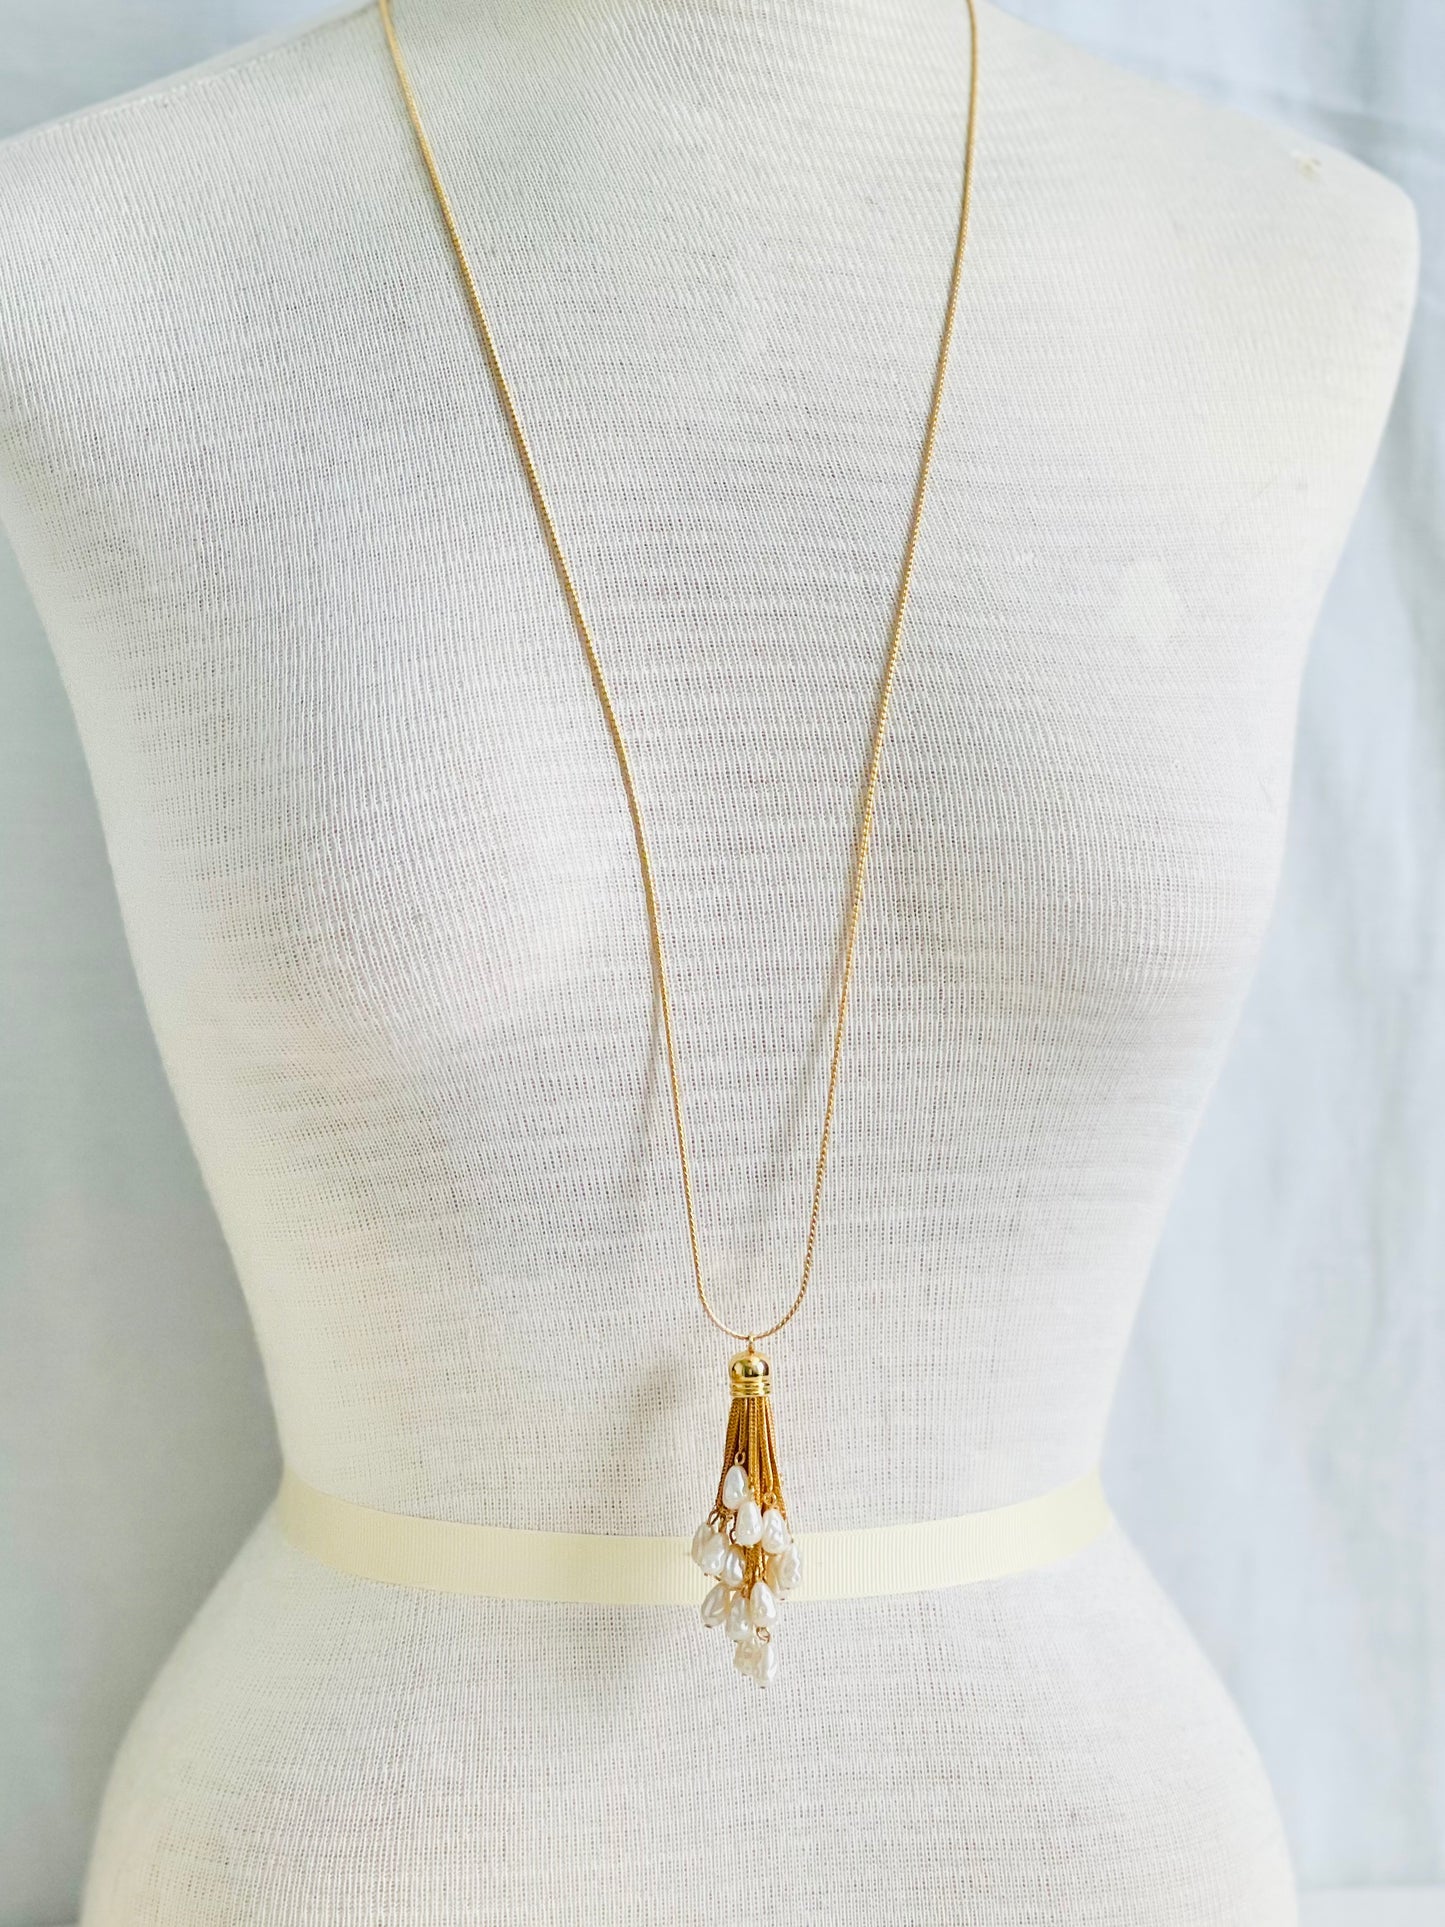 Vintage Long Gold Chain Pearl Tassel Necklace